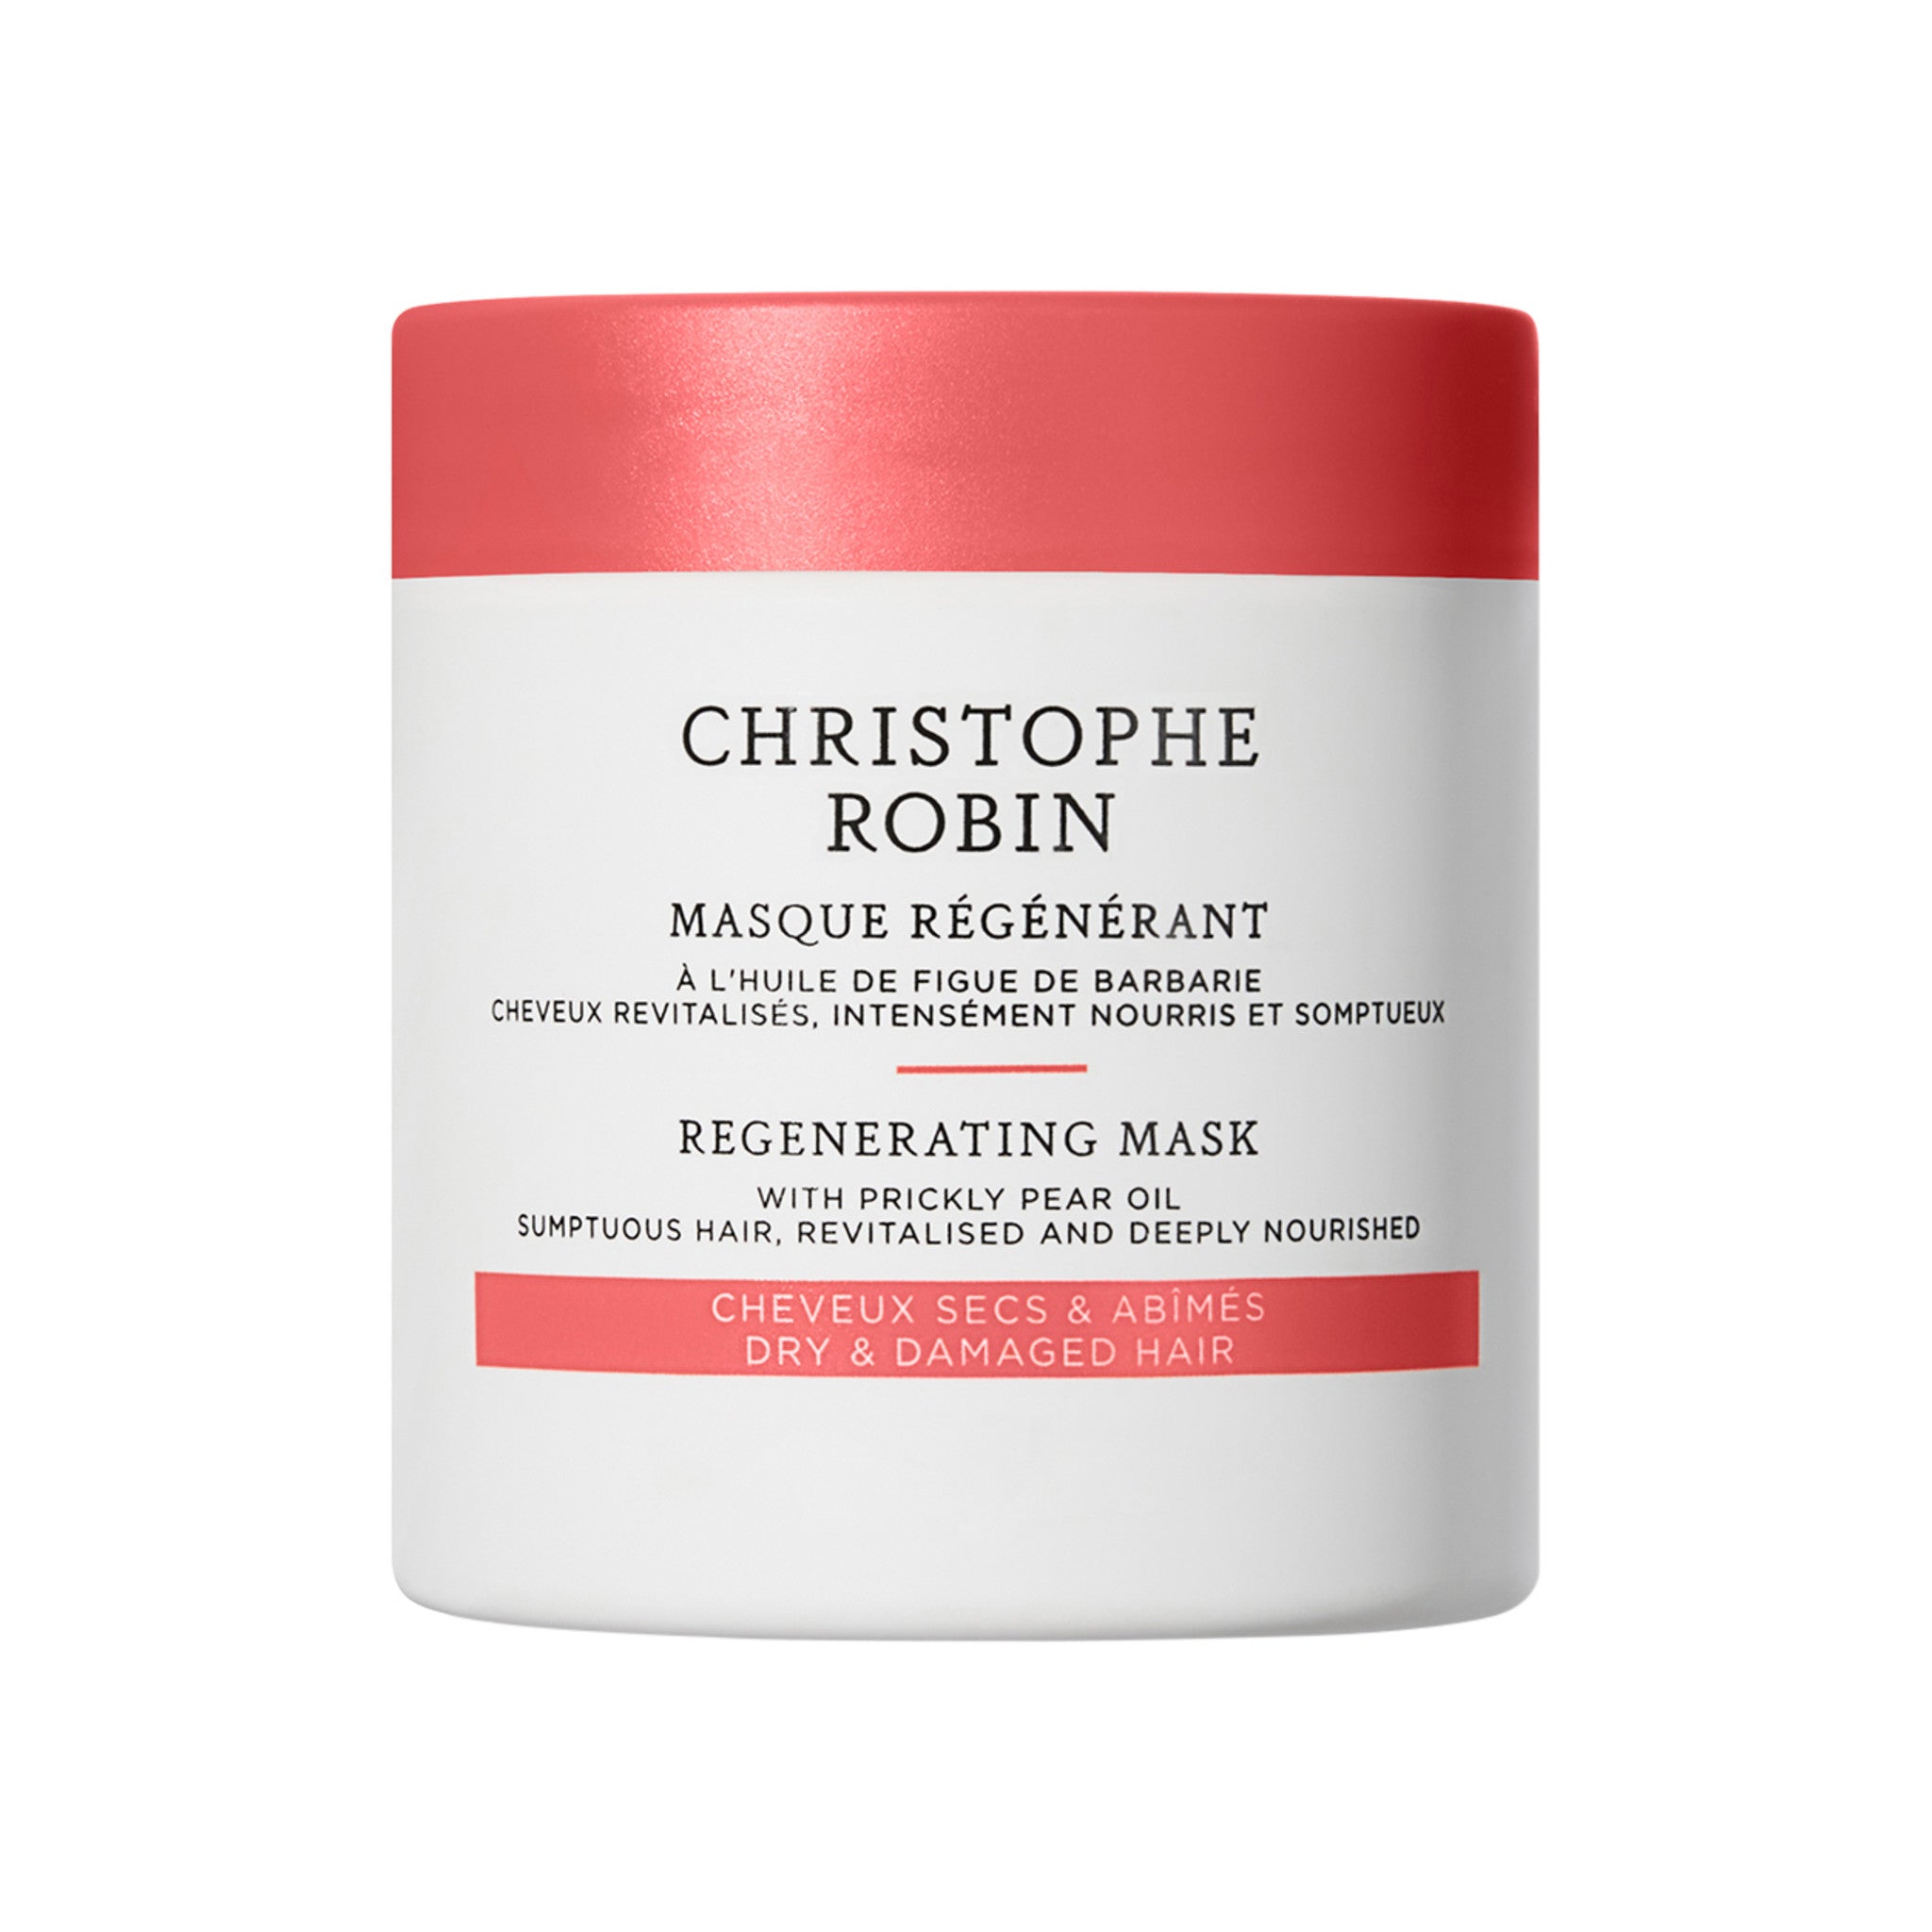 Christophe Robin Regenerating Mask With Rare Prickly Pear Seed Oil Size variant: 2.5 fl oz main image.